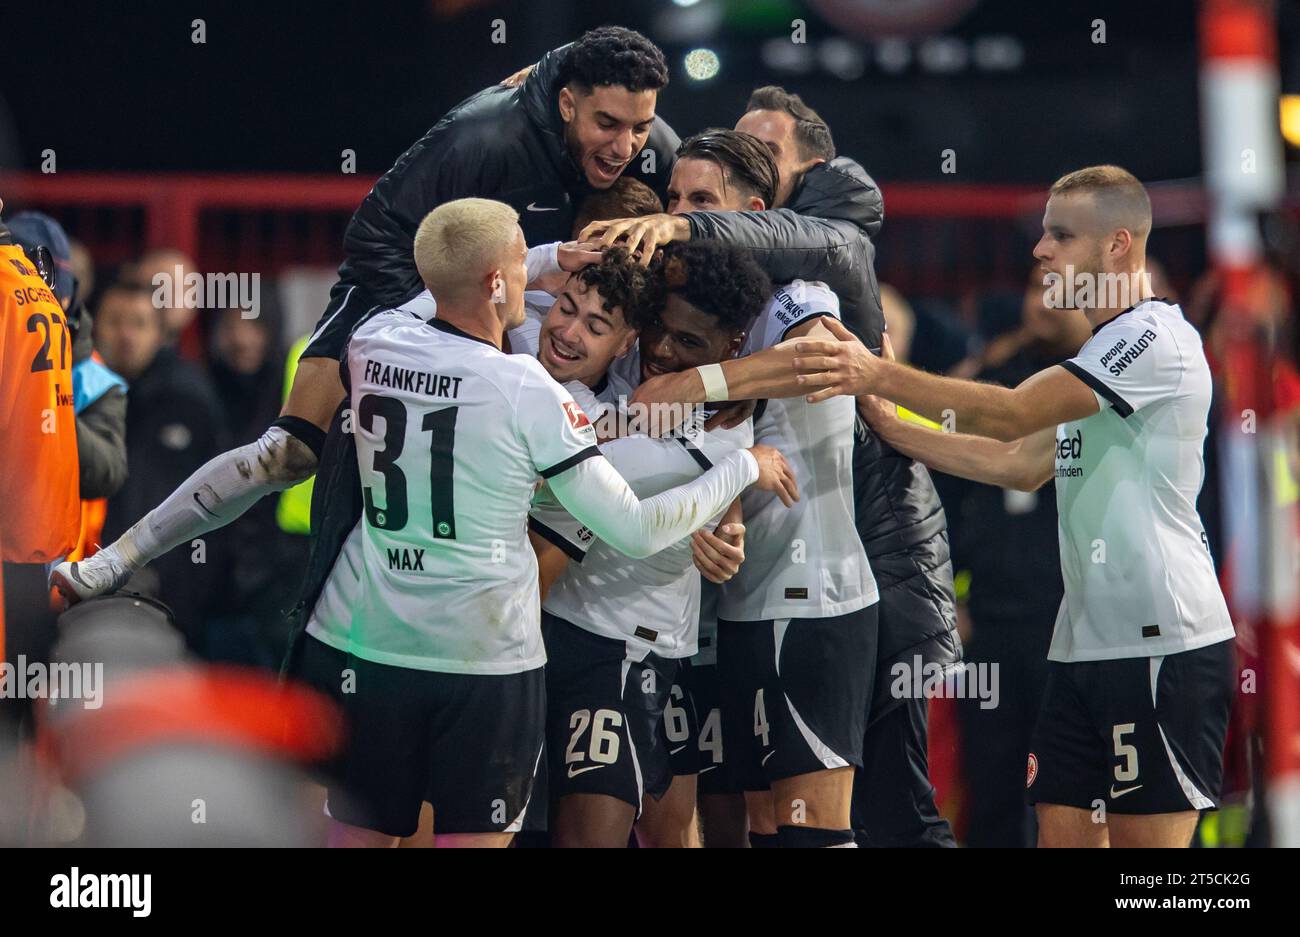 Berlin, Germany. 04th Nov, 2023. Soccer: Bundesliga, 1. FC Union Berlin - Eintracht Frankfurt, Matchday 10, An der Alten Försterei. The team celebrates the 3:0 goal by Nacho Ferri from Eintracht Frankfurt. Credit: Andreas Gora/dpa - IMPORTANT NOTE: In accordance with the regulations of the DFL German Football League and the DFB German Football Association, it is prohibited to utilize or have utilized photographs taken in the stadium and/or of the match in the form of sequential images and/or video-like photo series./dpa/Alamy Live News Stock Photo